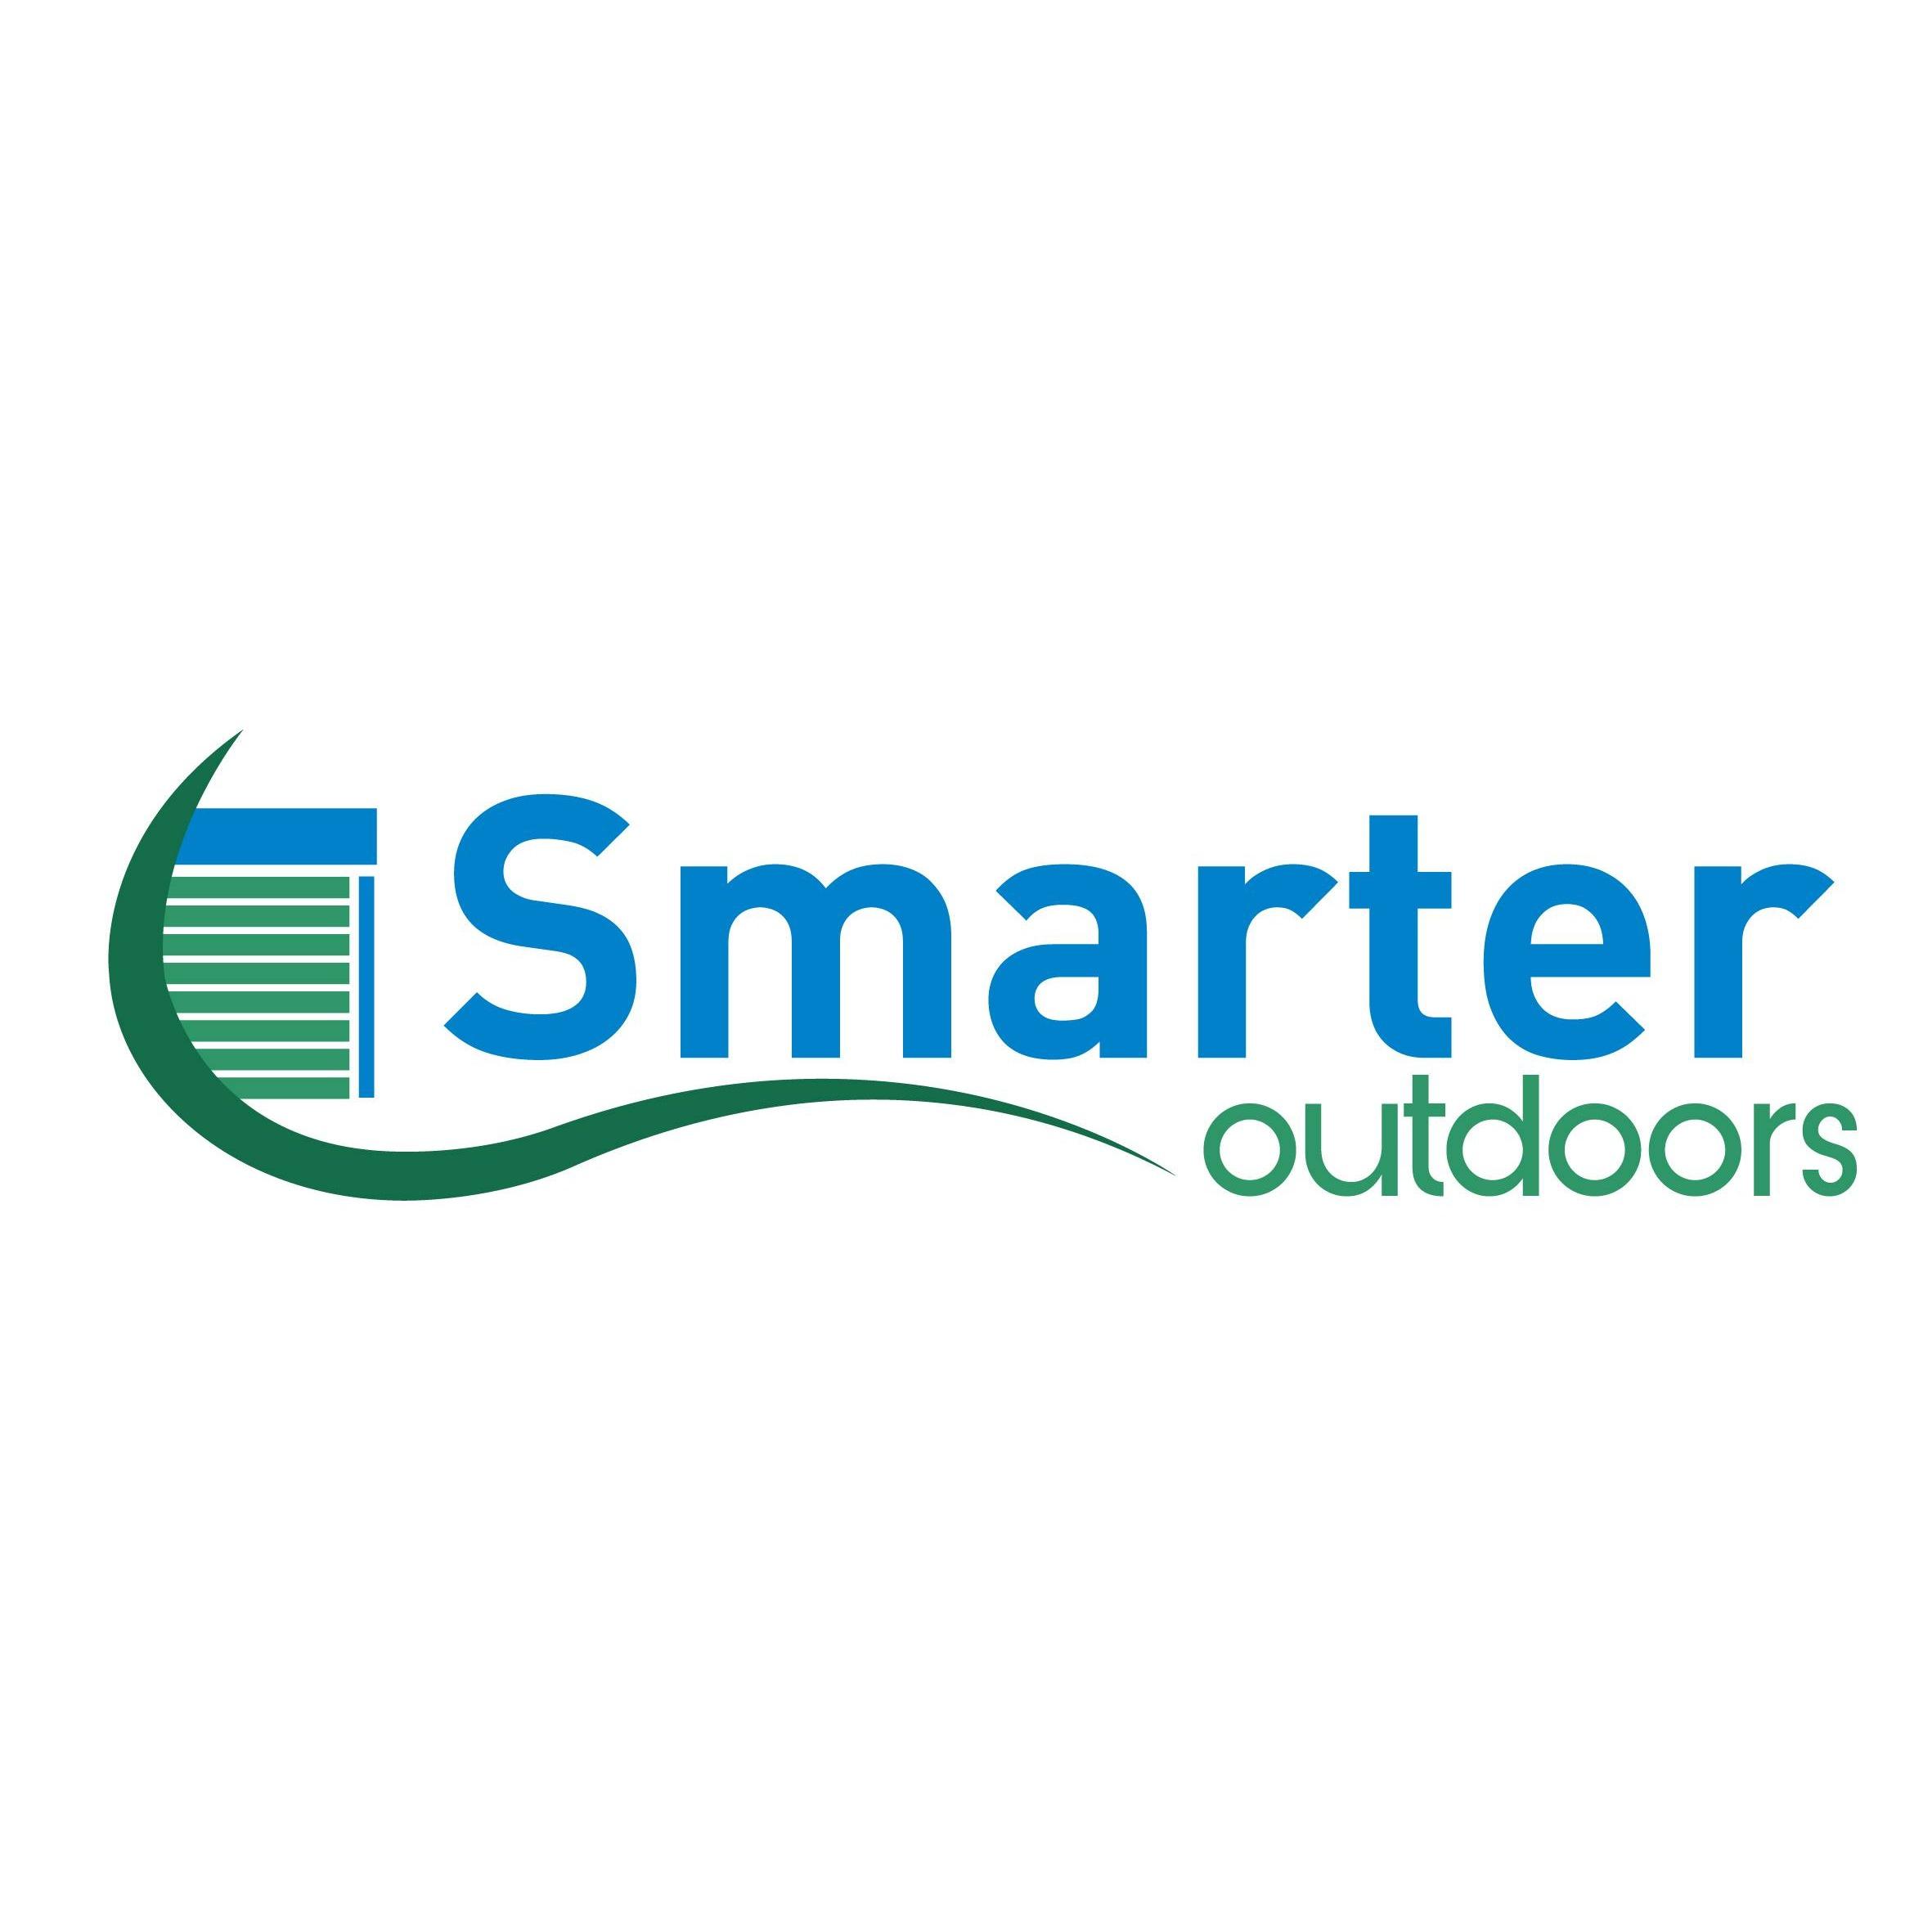 Smarter Outdoors Roller Shutters & Outdoor Blinds Perth Stirling